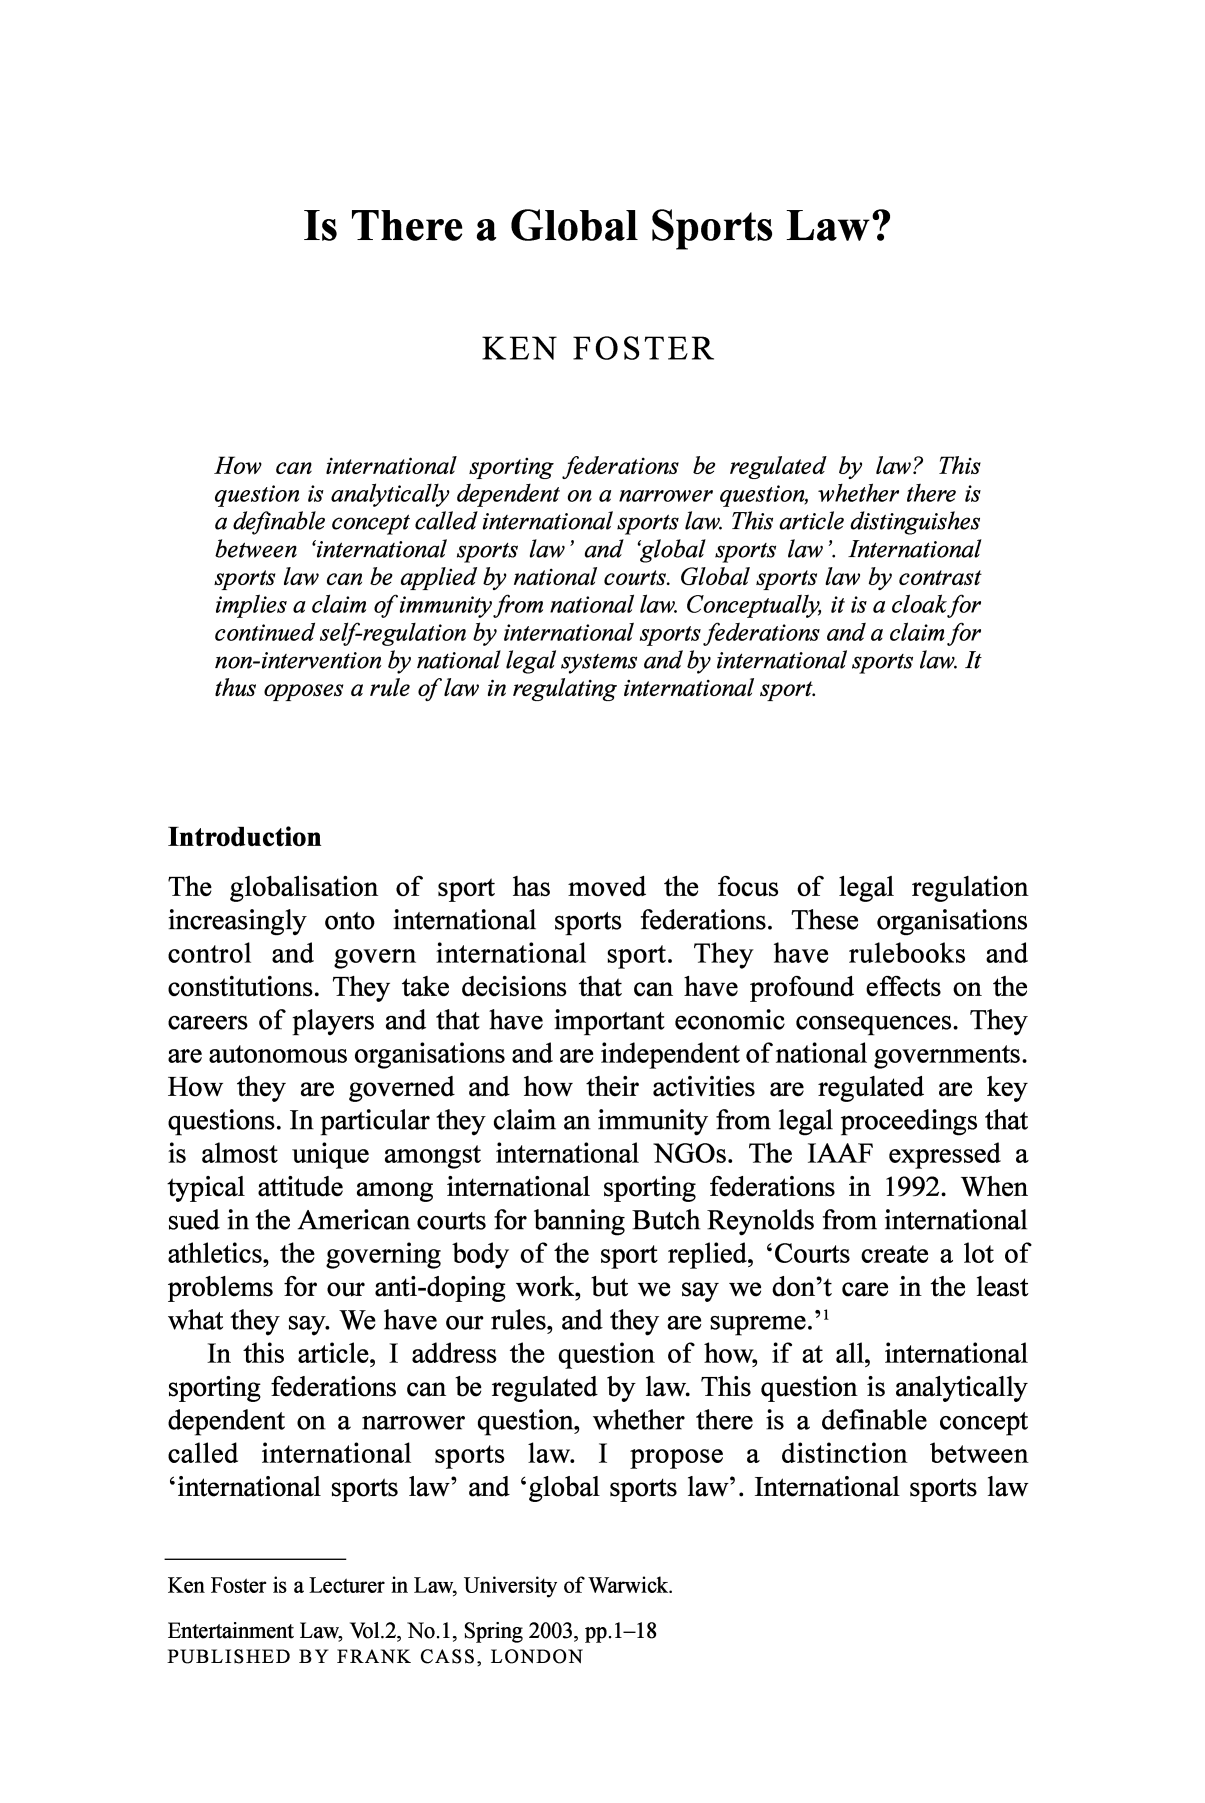 handle is hein.journals/entersport2 and id is 1 raw text is: Is There a Global Sports Law?KEN FOSTERHow can international sporting federations be regulated by law? Thisquestion is analytically dependent on a narrower question, whether there isa definable concept called international sports law. This article distinguishesbetween 'international sports law' and 'global sports law'. Internationalsports law can be applied by national courts. Global sports law by contrastimplies a claim of immunity from national law. Conceptually, it is a cloakforcontinued self-regulation by international sports federations and a claim fornon-intervention by national legal systems and by international sports law. Itthus opposes a rule of law in regulating international sport.IntroductionThe globalisation of sport has moved the focus of legal regulationincreasingly onto international sports federations. These organisationscontrol and govern international sport. They have rulebooks andconstitutions. They take decisions that can have profound effects on thecareers of players and that have important economic consequences. Theyare autonomous organisations and are independent of national governments.How they are governed and how their activities are regulated are keyquestions. In particular they claim an immunity from legal proceedings thatis almost unique amongst international NGOs. The IAAF expressed atypical attitude among international sporting federations in 1992. Whensued in the American courts for banning Butch Reynolds from internationalathletics, the governing body of the sport replied, 'Courts create a lot ofproblems for our anti-doping work, but we say we don't care in the leastwhat they say. We have our rules, and they are supreme.'In this article, I address the question of how, if at all, internationalsporting federations can be regulated by law. This question is analyticallydependent on a narrower question, whether there is a definable conceptcalled international sports law. I propose a distinction between'international sports law' and 'global sports law'. International sports lawKen Foster is a Lecturer in Law, University of Warwick.Entertainment Law, Vol.2, No.1, Spring 2003, pp.1-18PUBLISHED BY FRANK CASS, LONDON